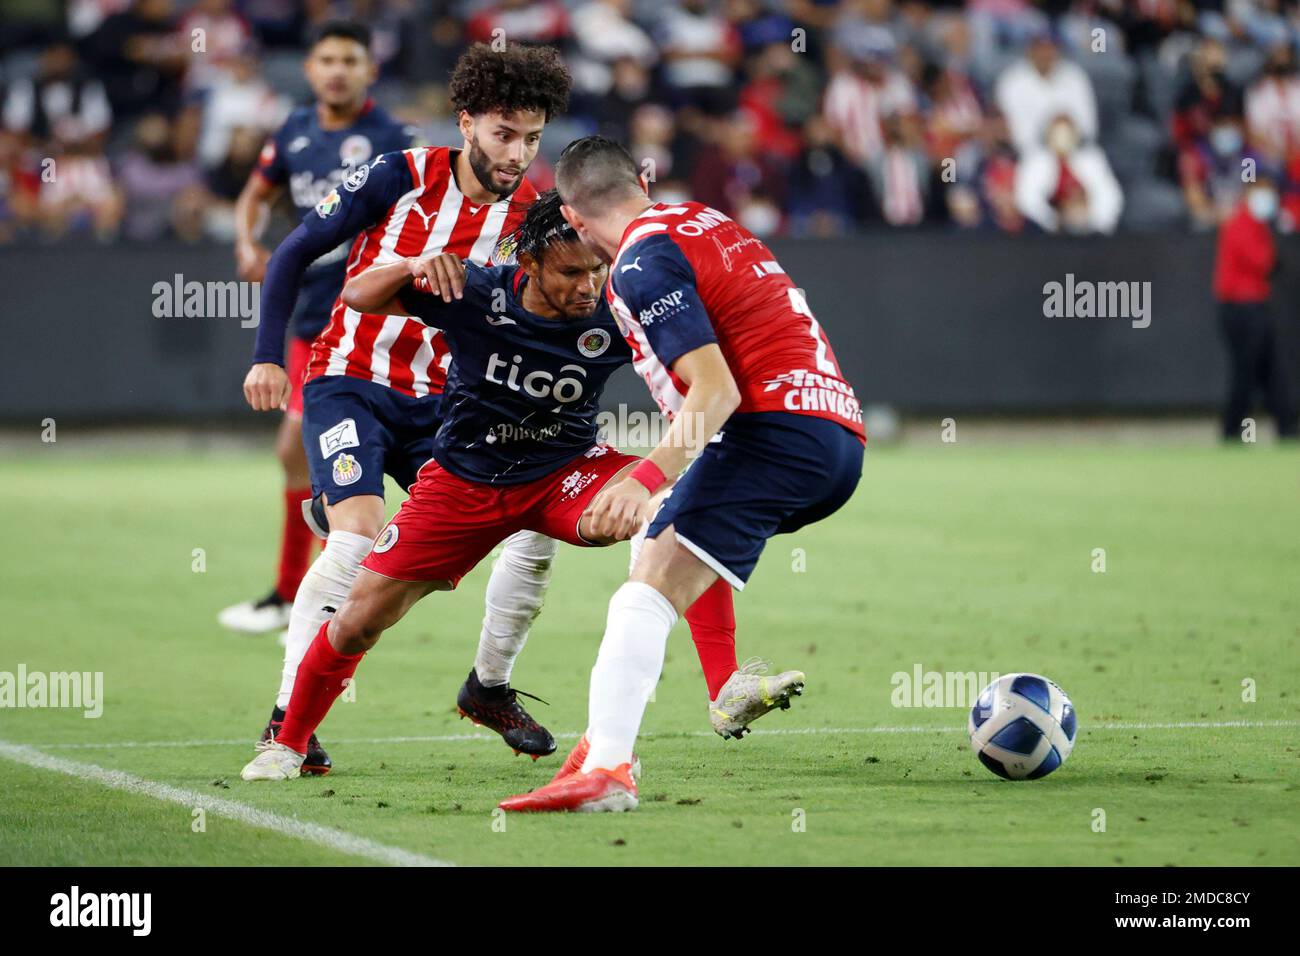 C.D. FAS' Wilma Torres (21) vies the ball against Chivas Guadalajara's  Cesar Huerta (6) and Chivas Guadalajara's Manuel Mayorga (2) during the  second half of a friendly soccer match, Wednesday, Oct. 6,